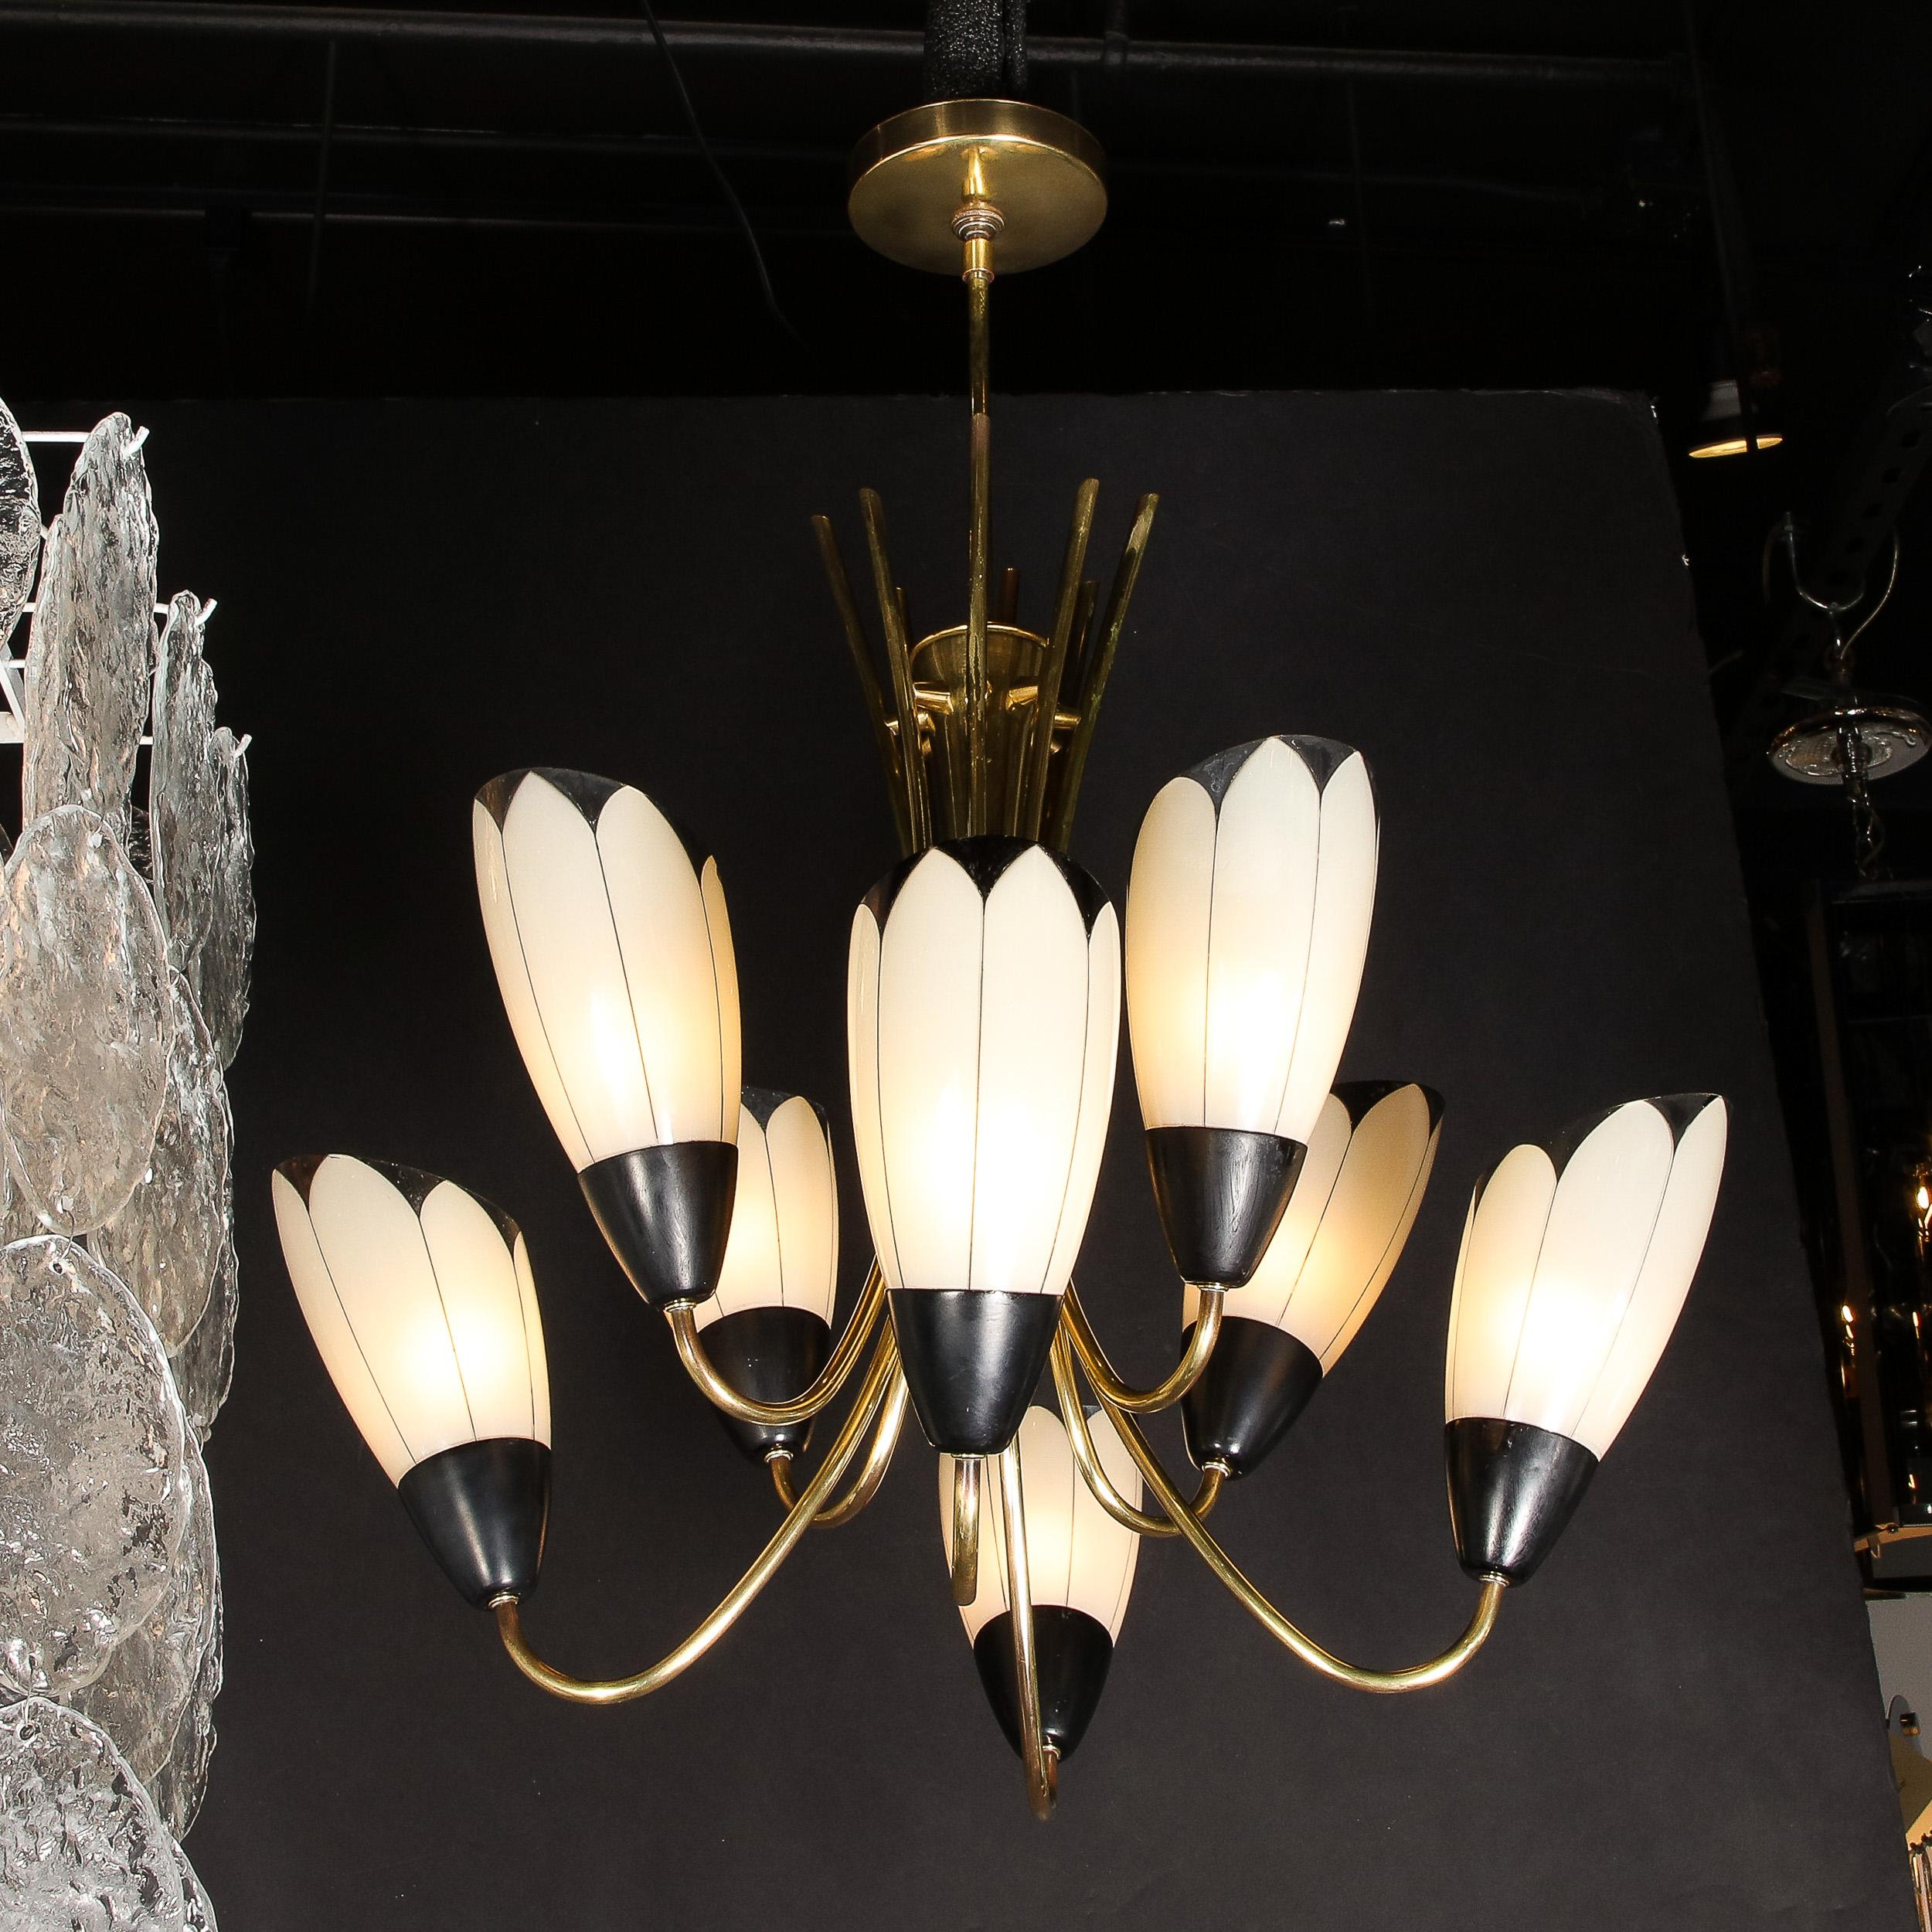 Mid-20th Century Mid-Century Modern Floating Tulip Chandelier in Frosted Glass & Black Enamel